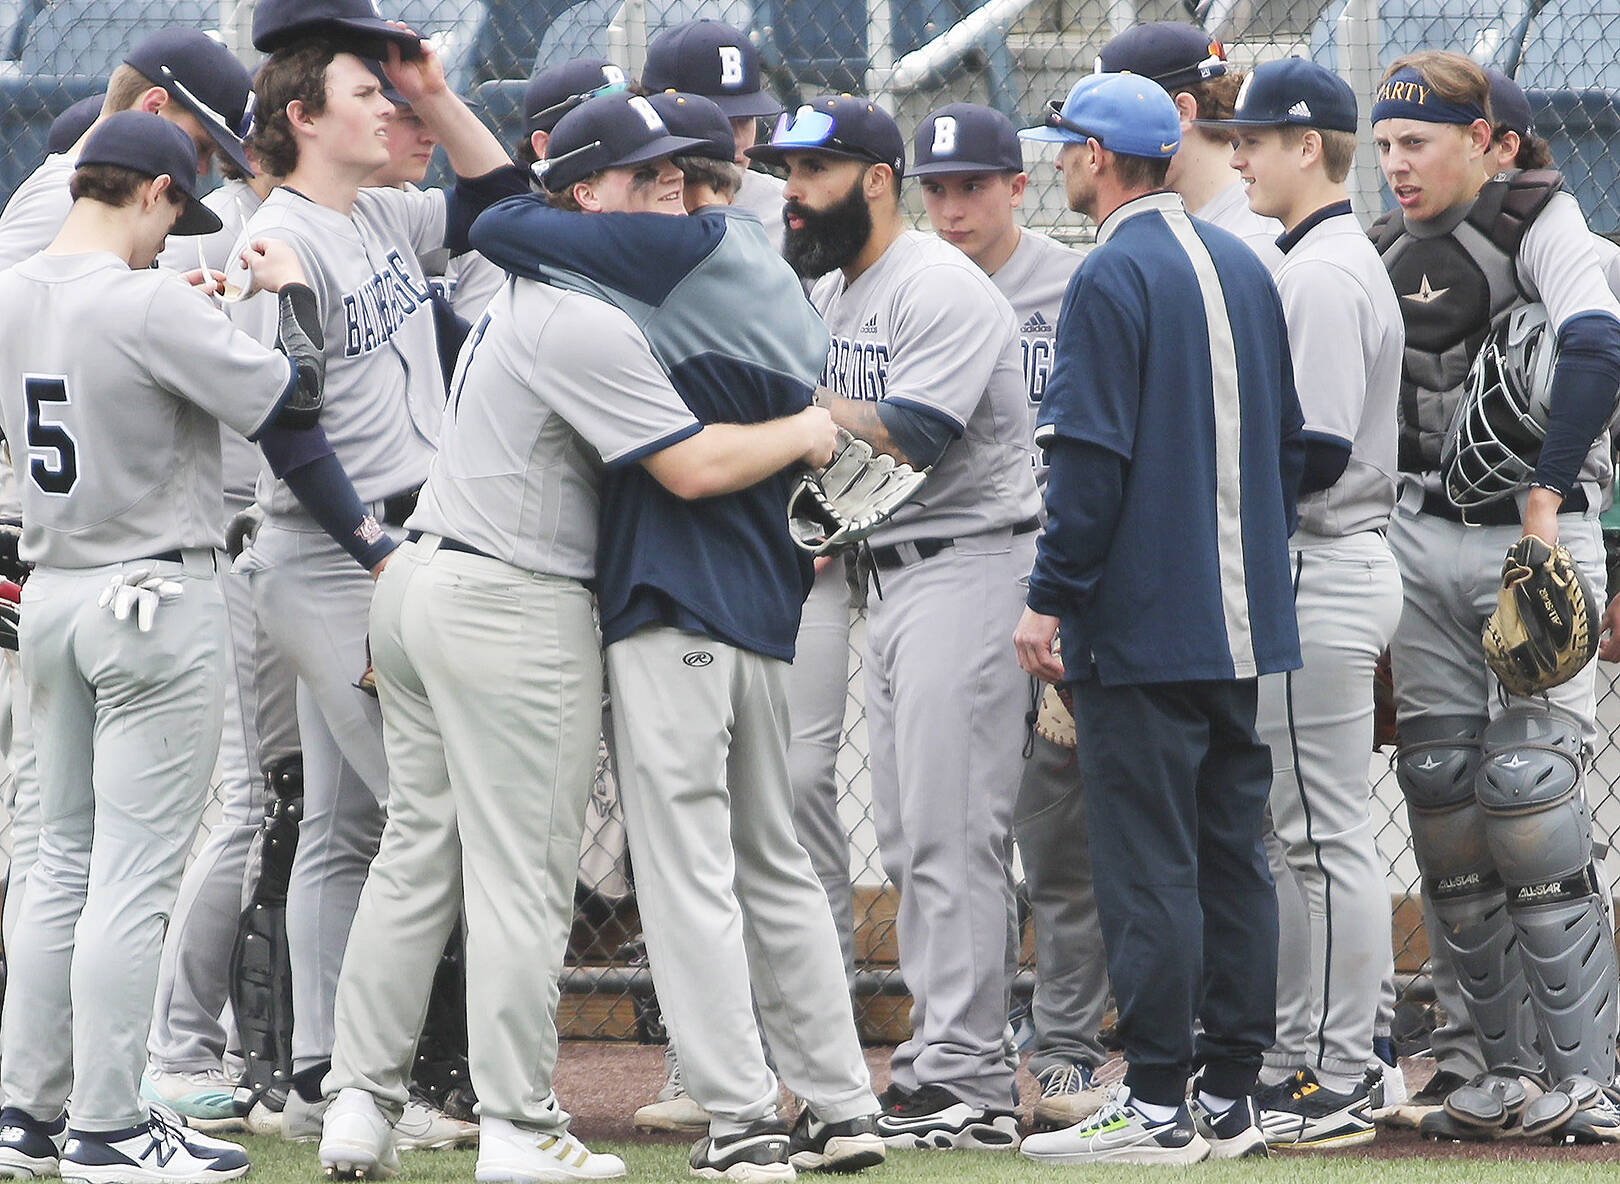 Joey Hildebrandt, center, gets a hug from a coach after hitting a key double in the contest.